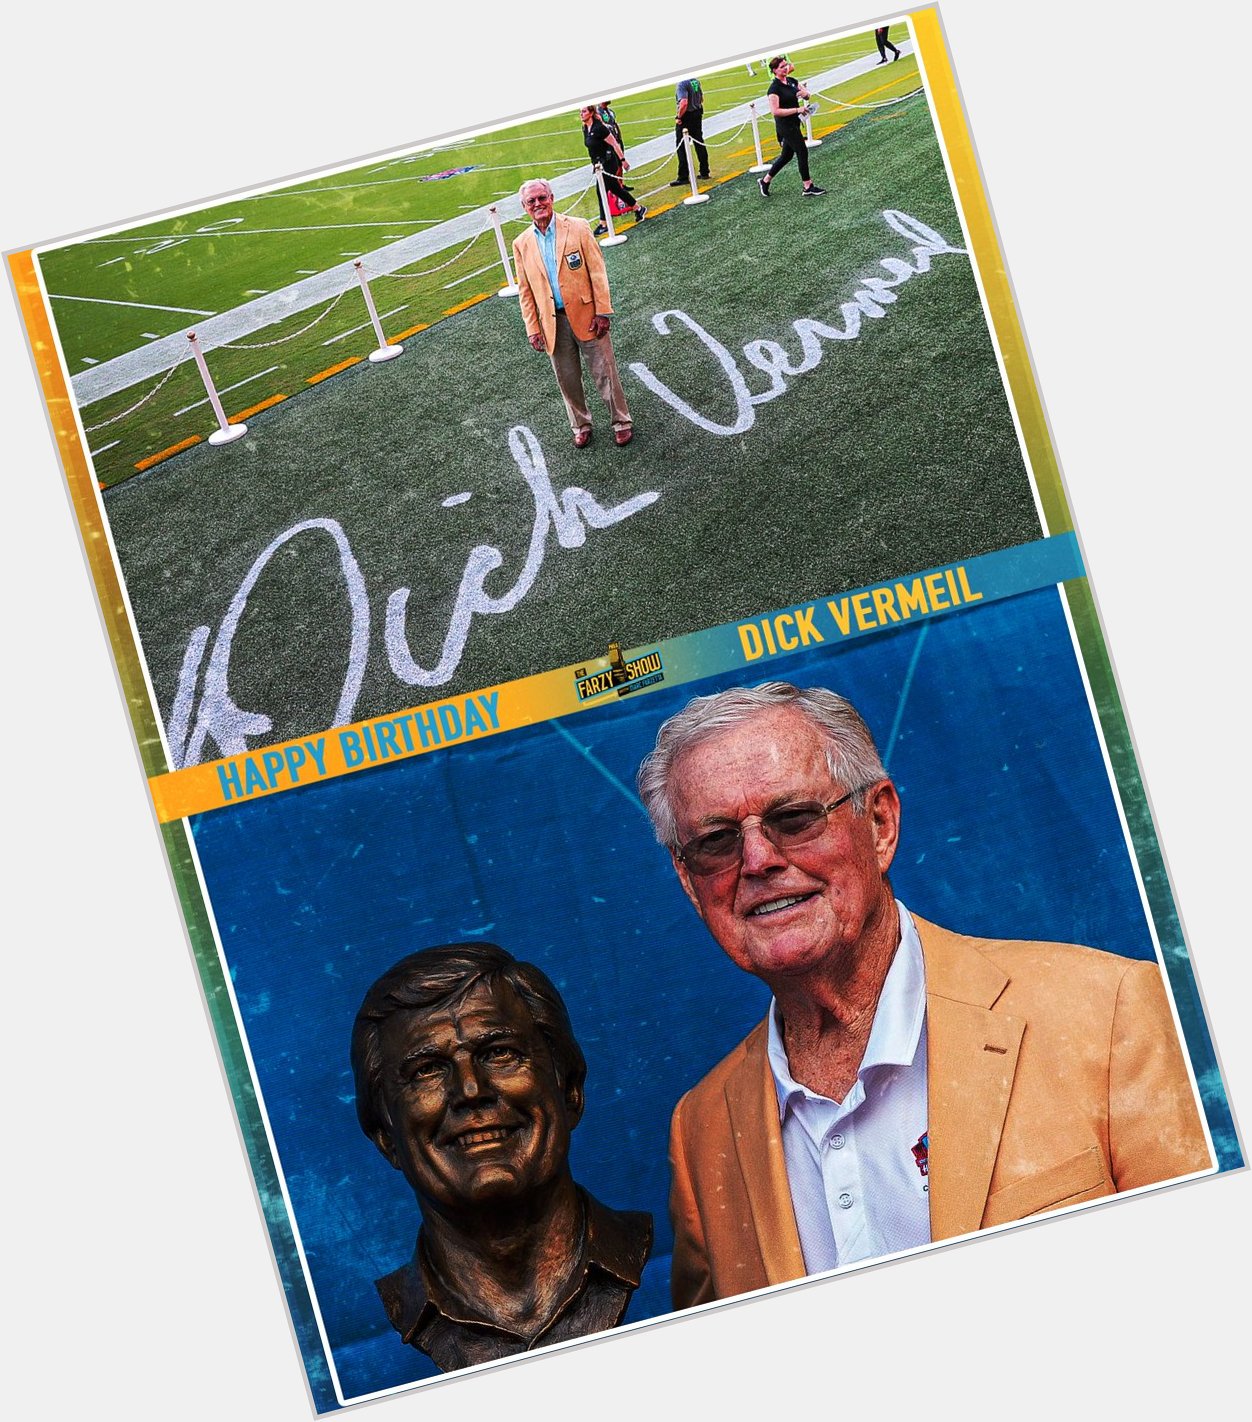 Wishing our former Hall of Fame coach Dick Vermeil a very happy 86th birthday! 